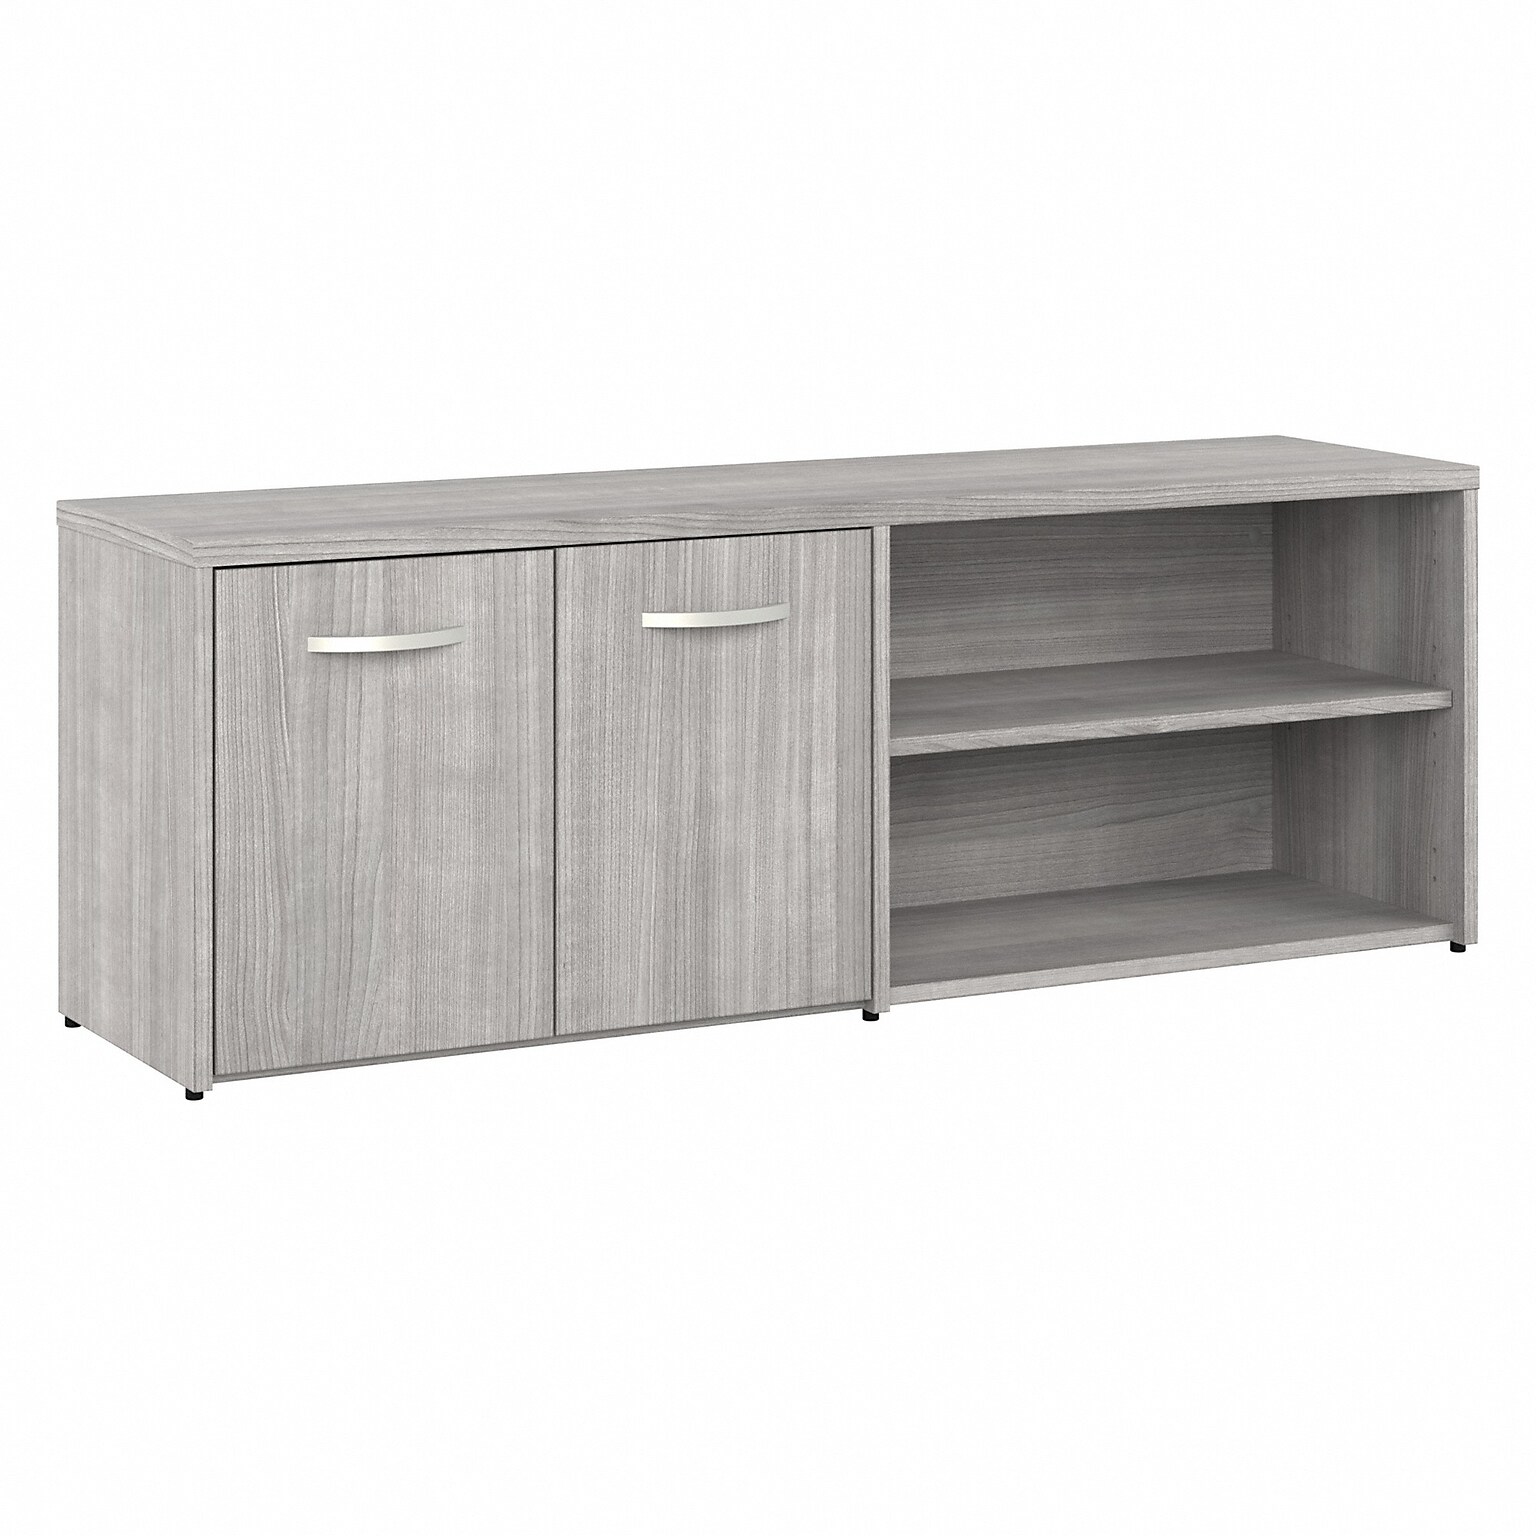 Bush Business Furniture Studio A 21 Low Storage Cabinet with 4 Shelves and Doors, Platinum Gray (SDS160PG-Z)